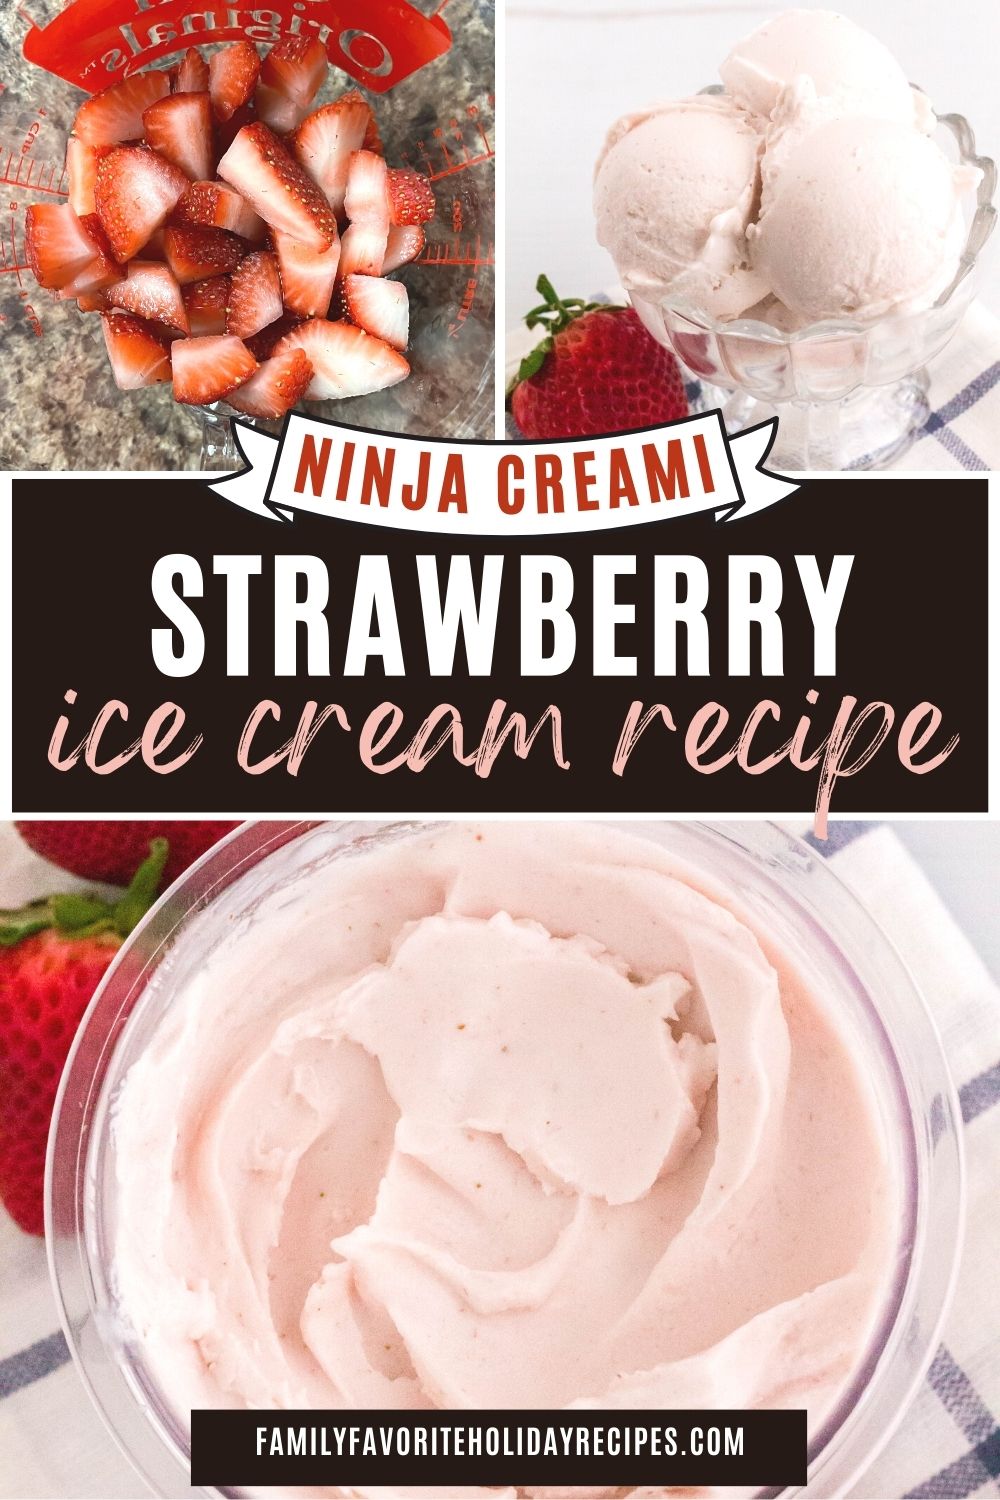 three photos;  one of fresh chopped strawberries, one of scoops of strawberry ice cream on a plate, and the other of a ninja creami pint of strawberry ice cream.